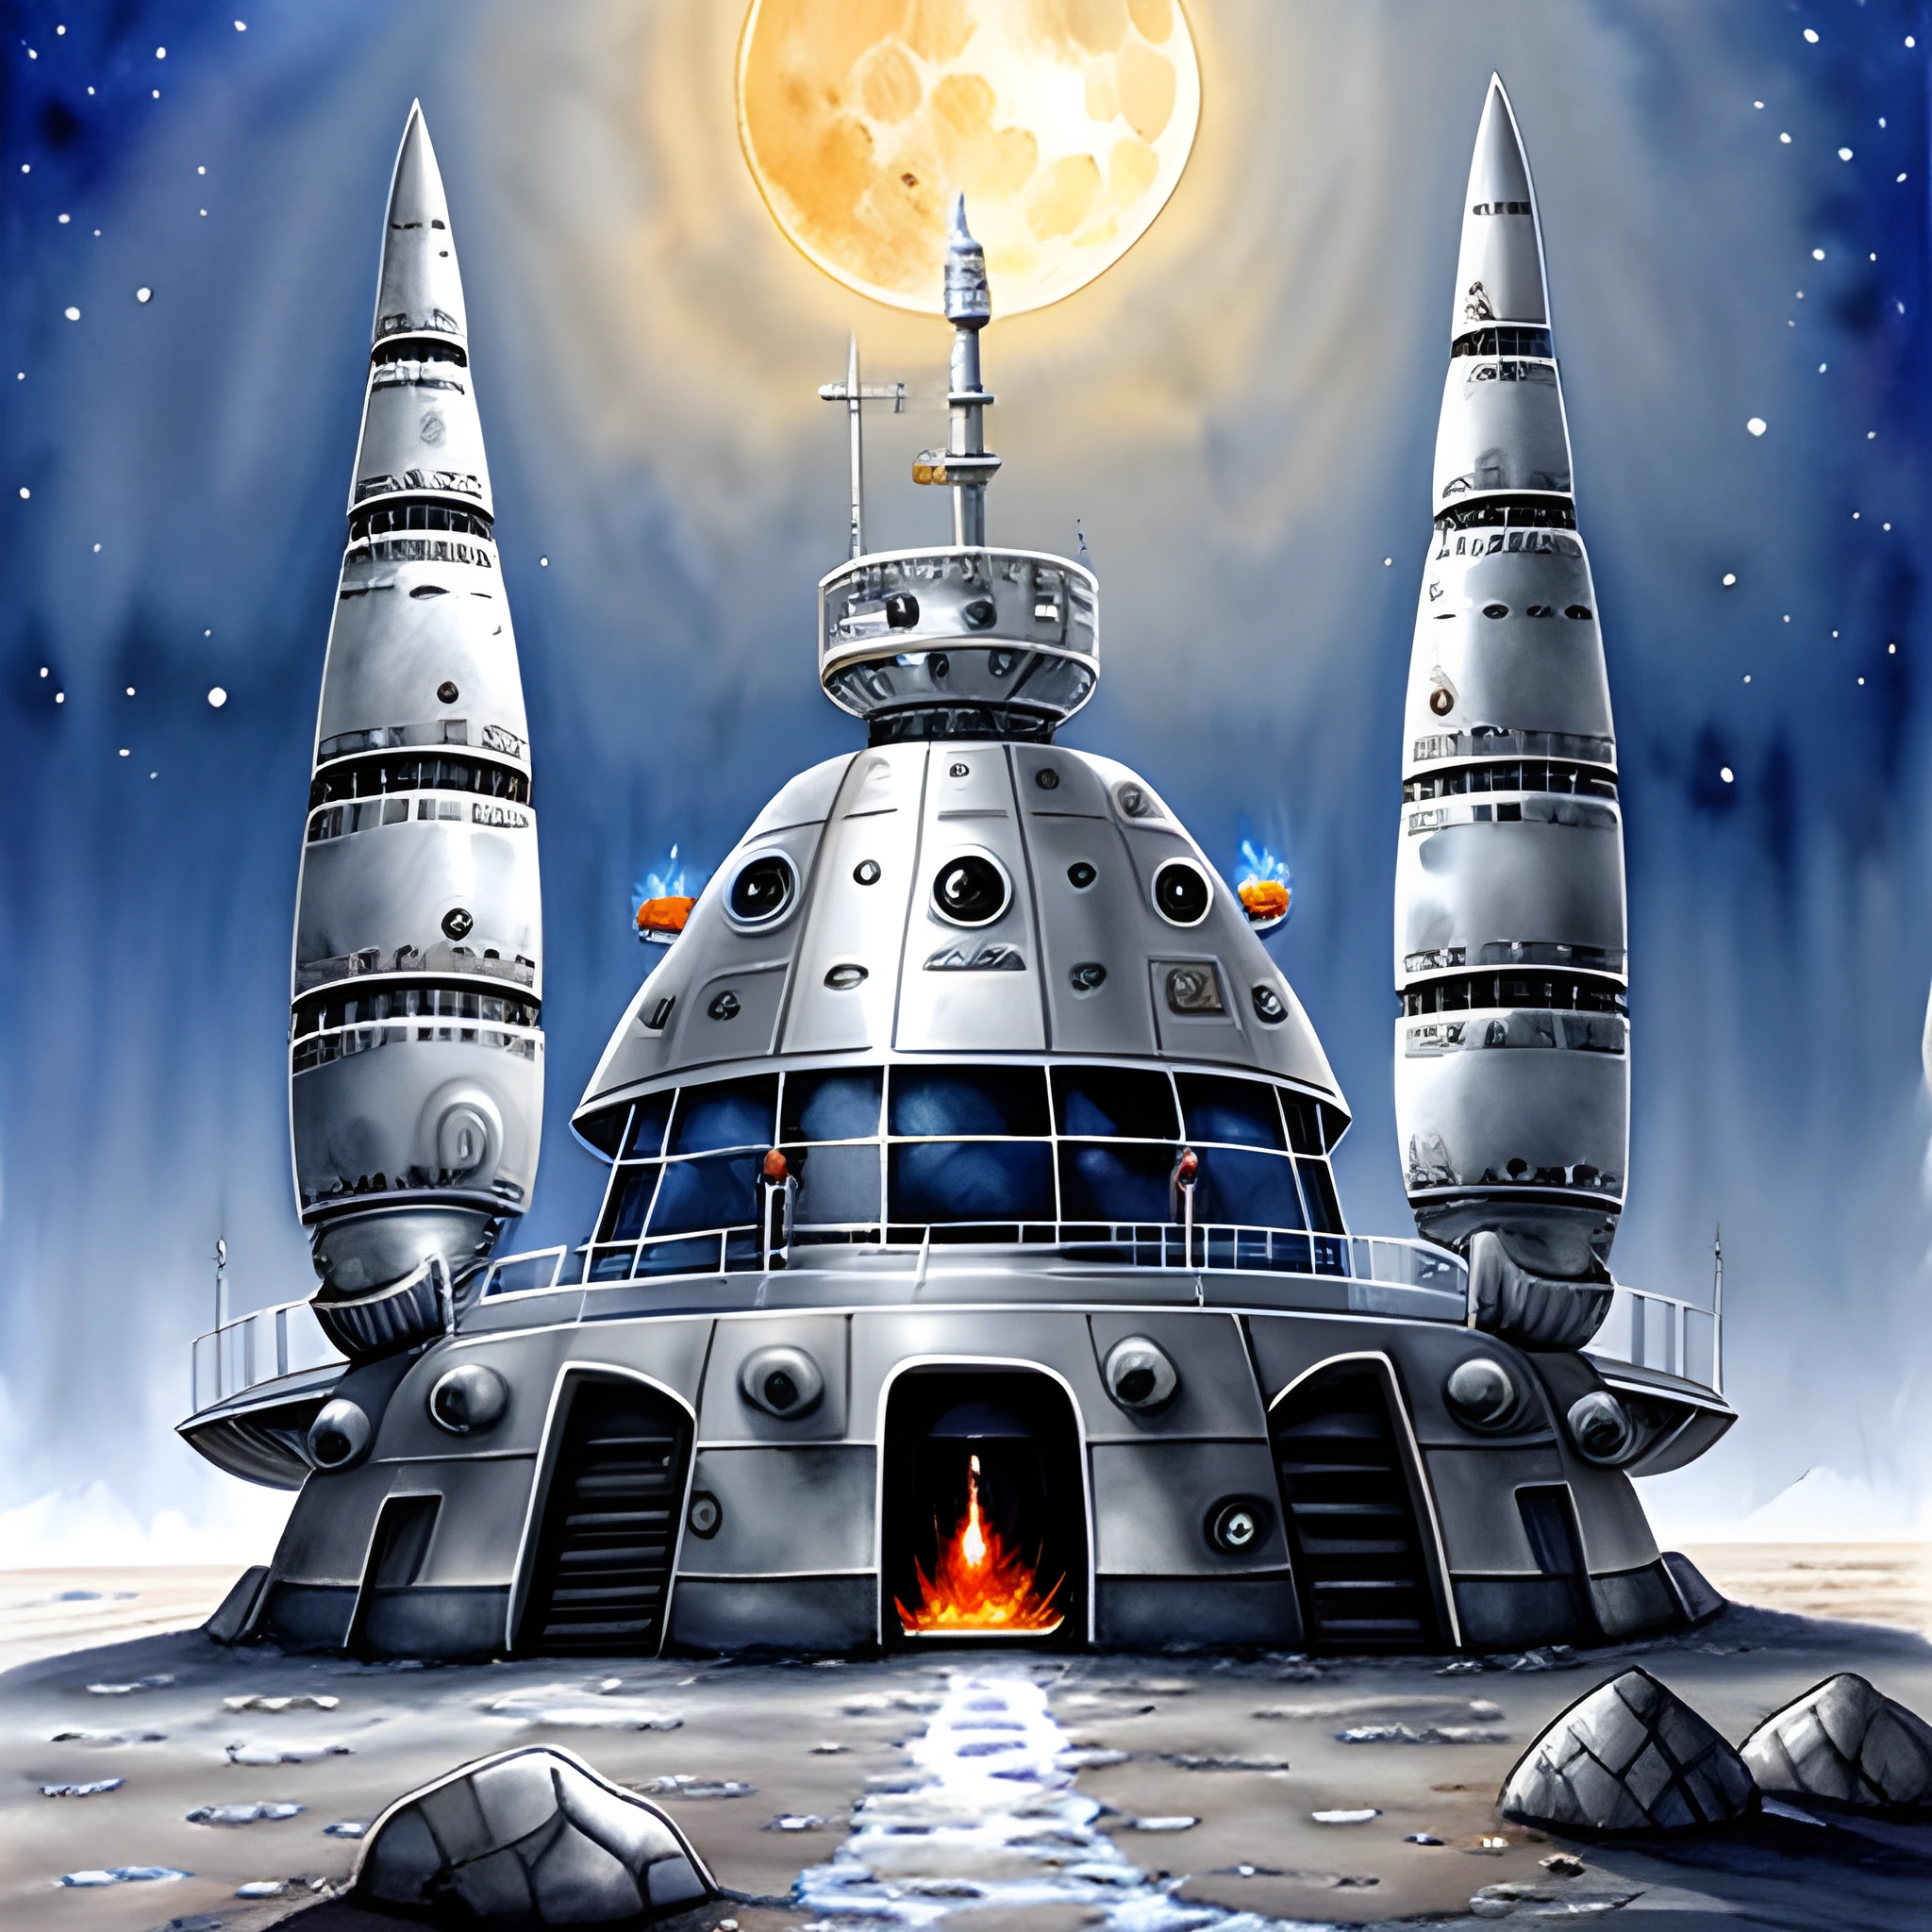 a drawing of a futuristic building with a fire inside